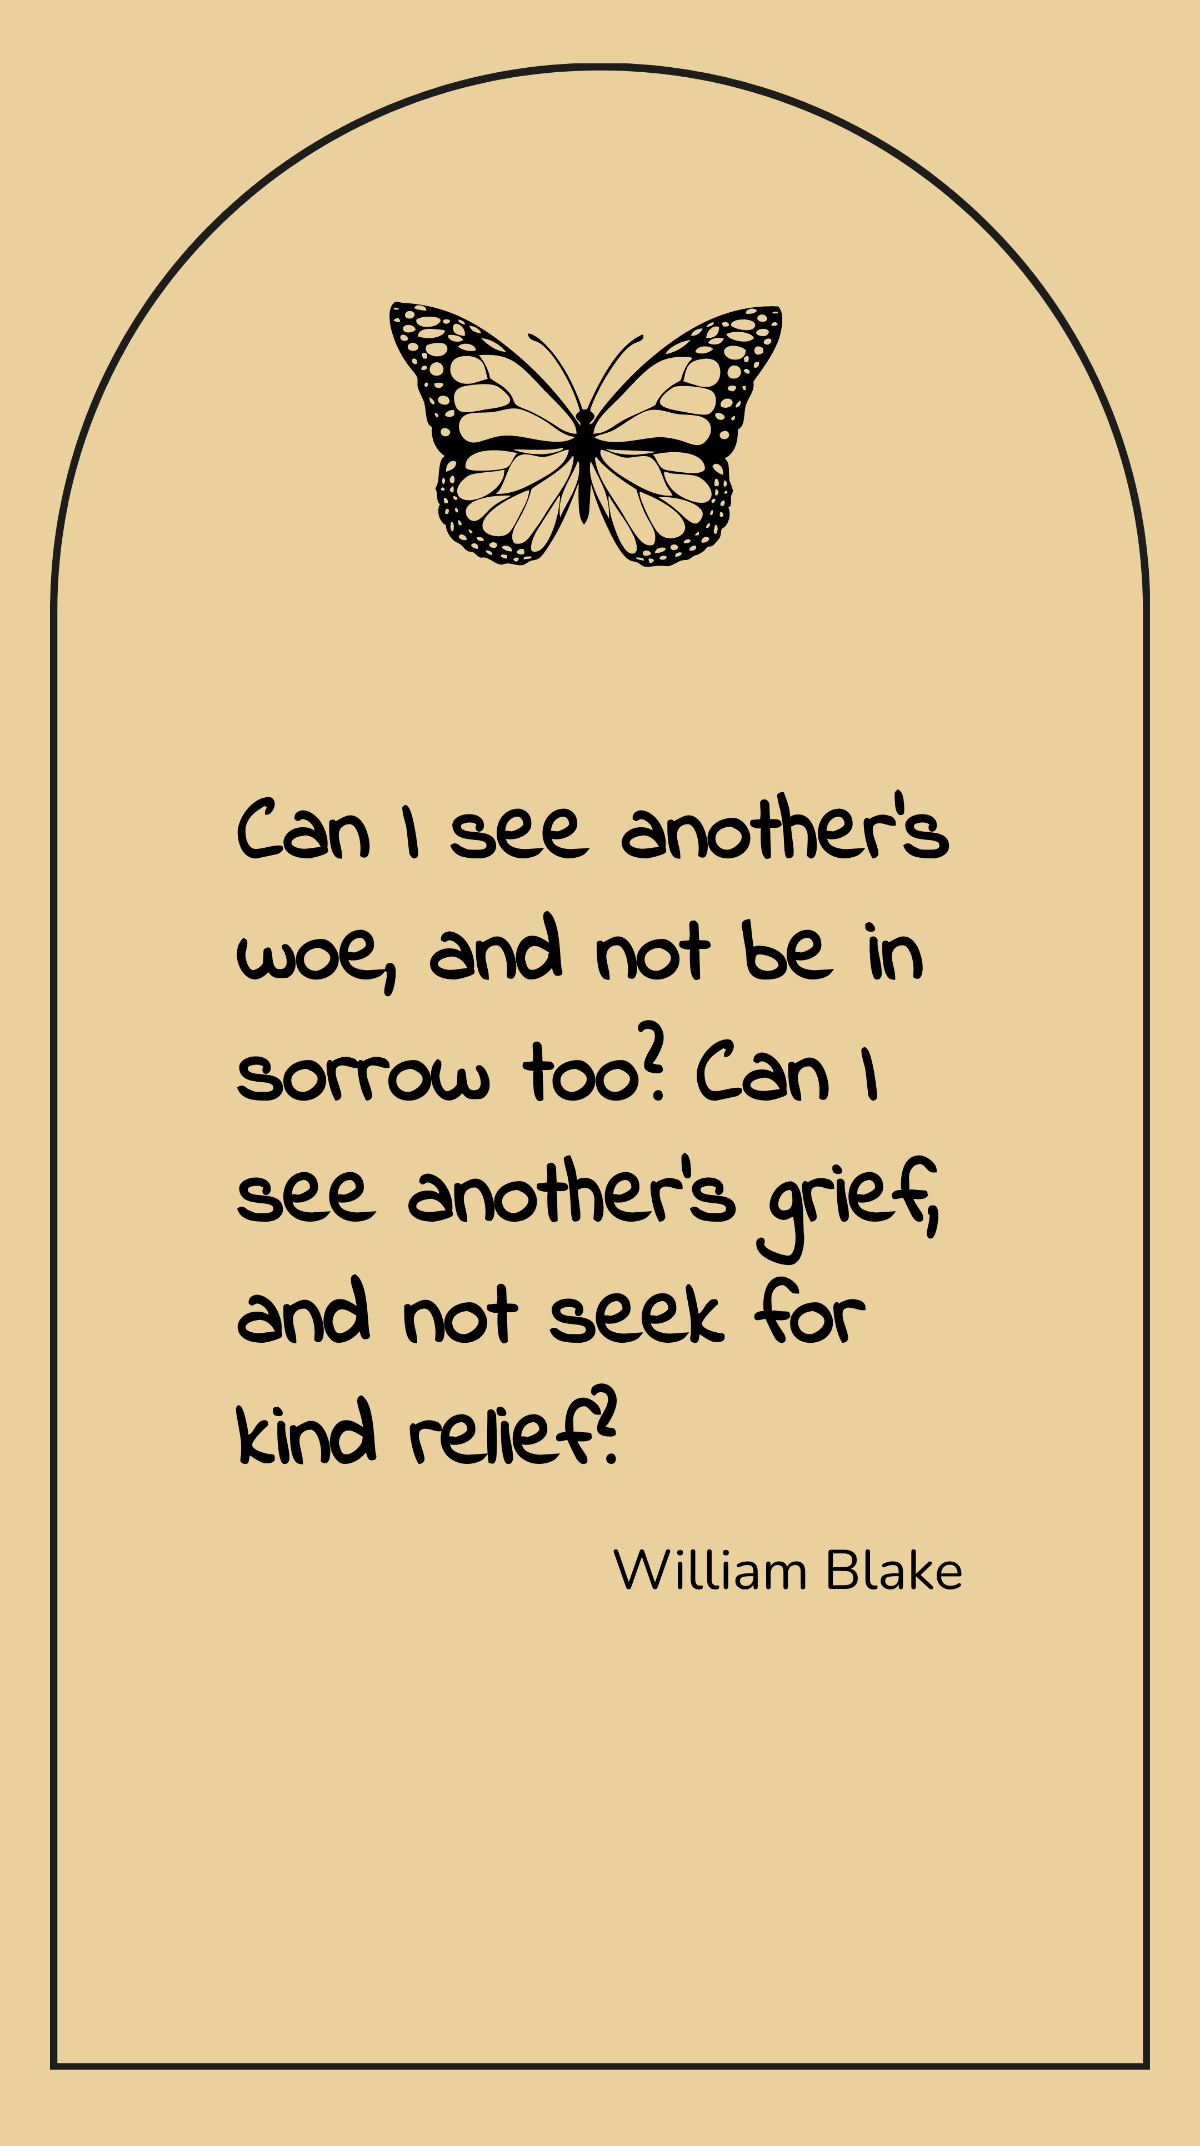 William Blake - Can I see another's woe, and not be in sorrow too? Can I see another's grief, and not seek for kind relief? Template